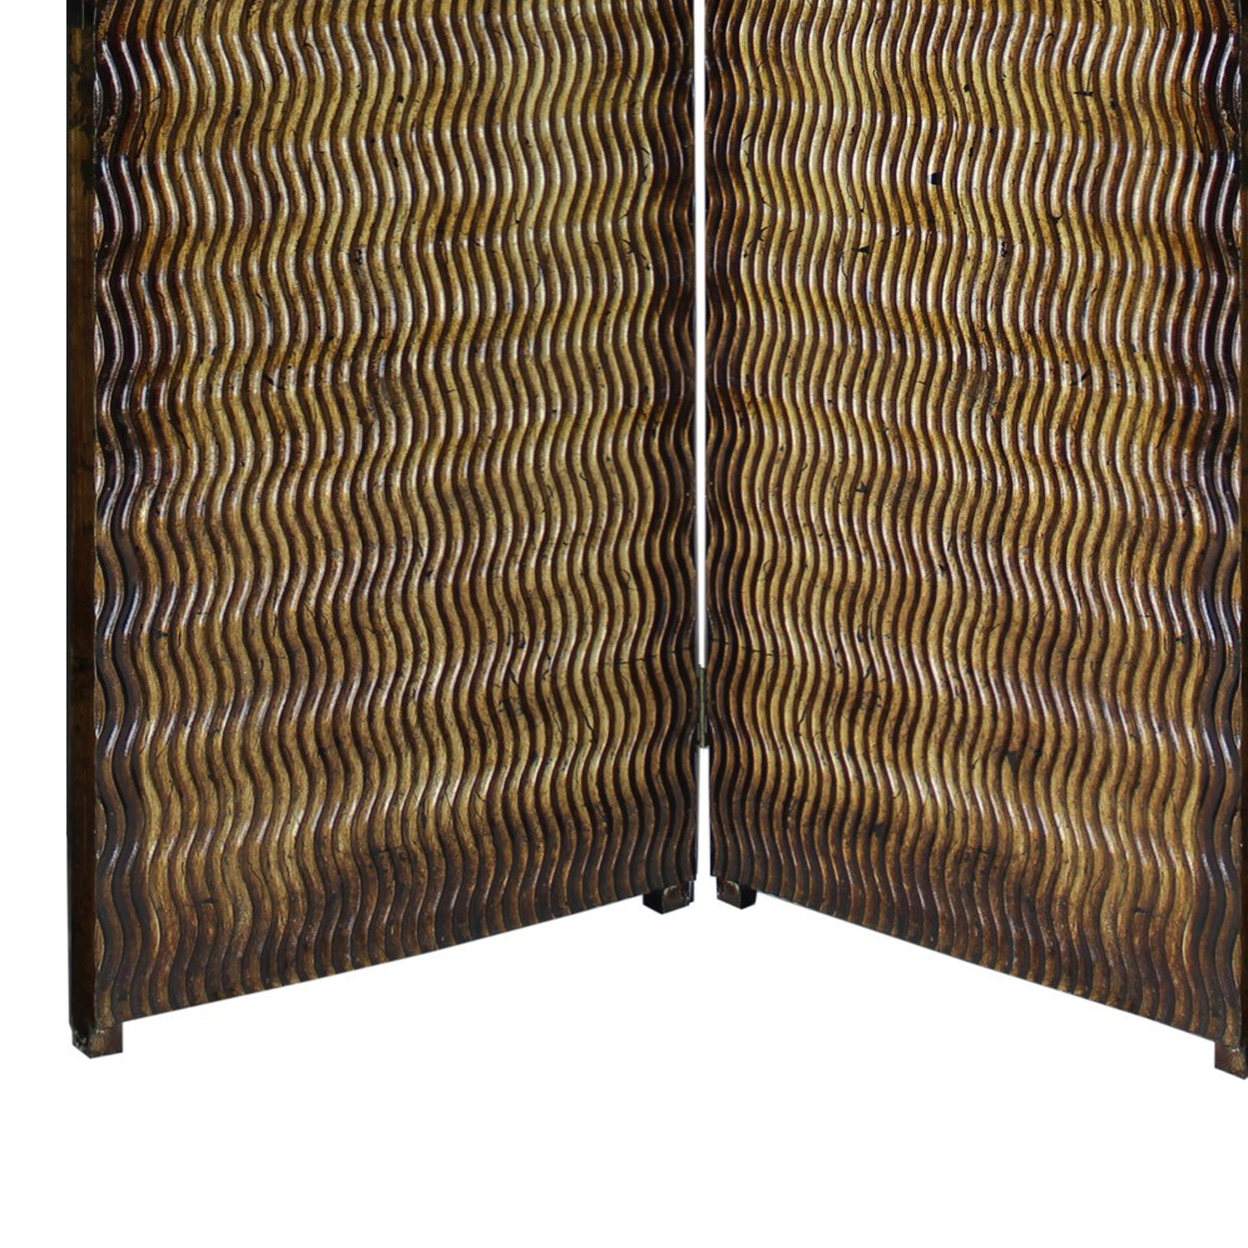 Dual Tone 3 Panel Wooden Foldable Room Divider With Wavy Design, Brown- Saltoro Sherpi